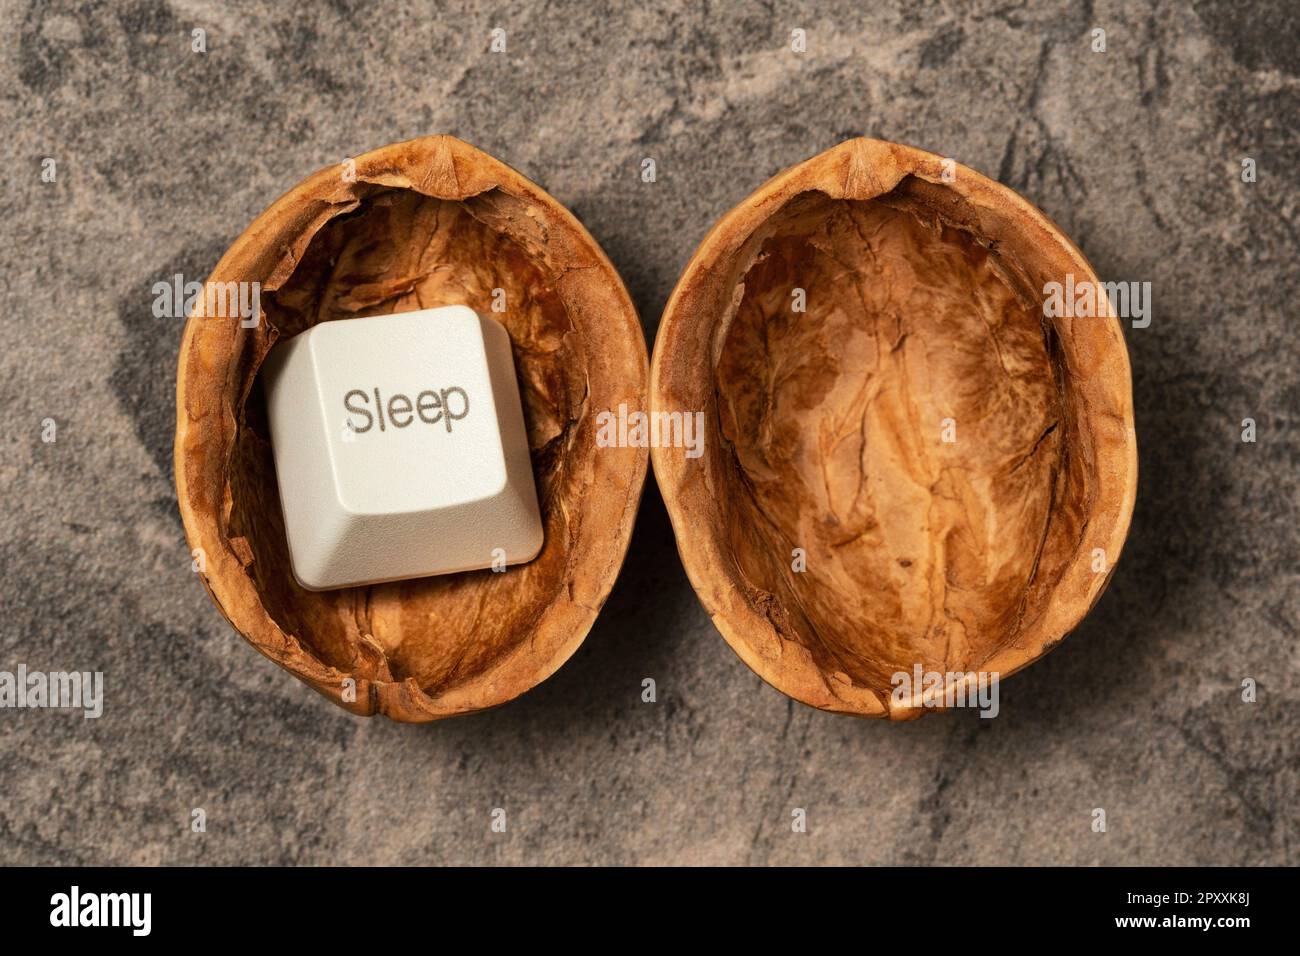 SLEEP computer button in a cracked walnut shell. Conceptual image. Stock Photo